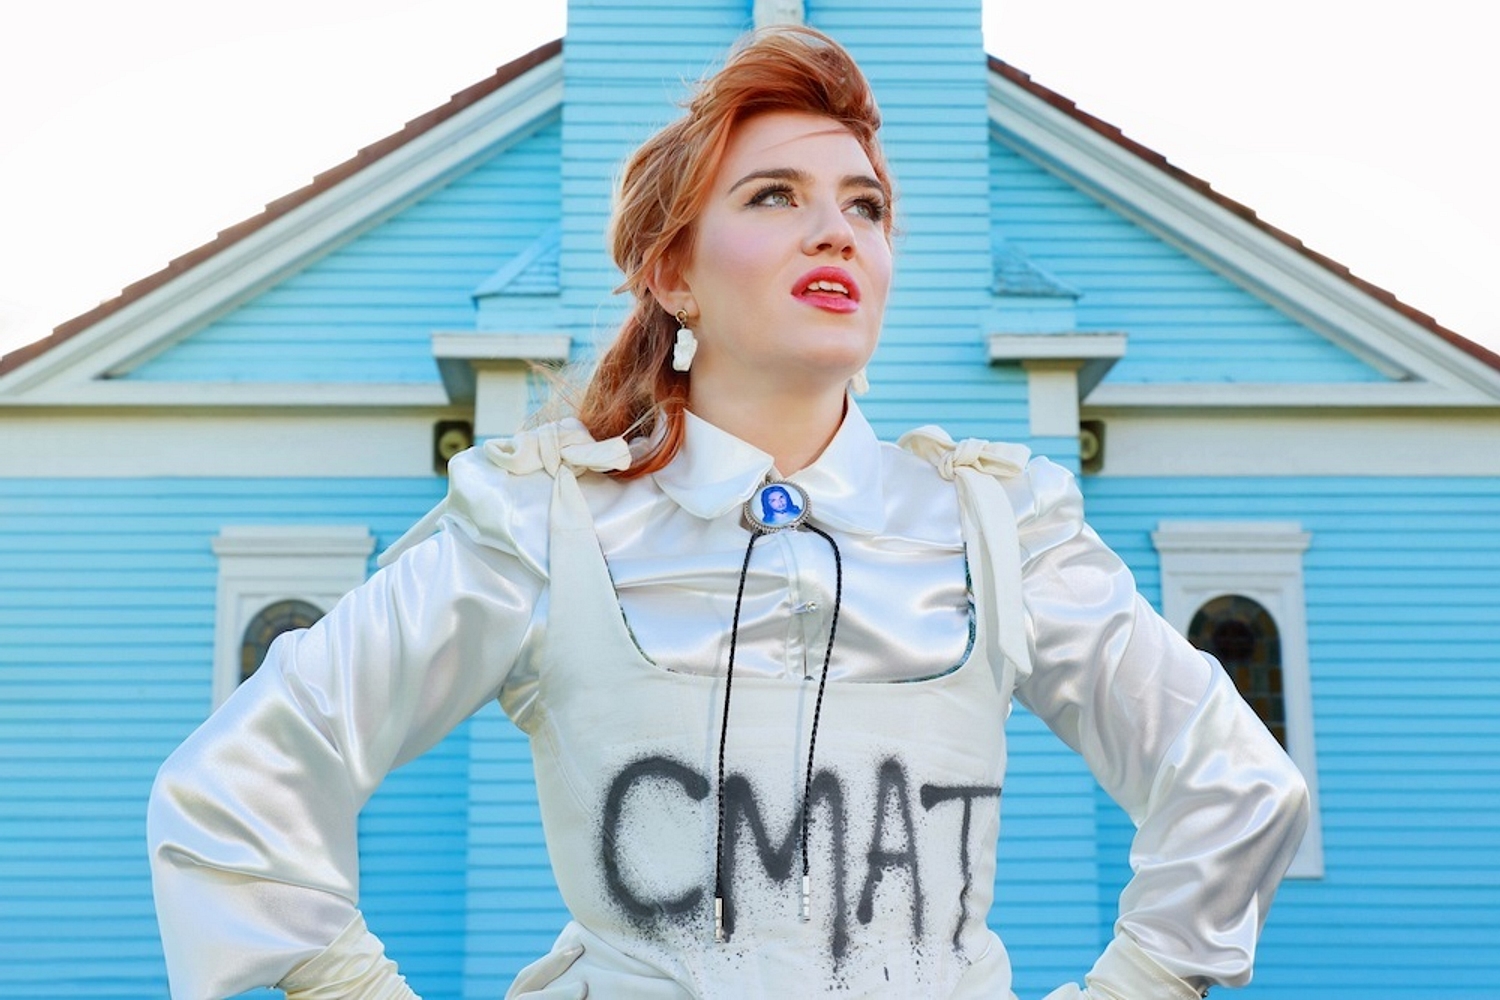 CMAT announces debut album ‘If My Wife New I’d Be Dead’